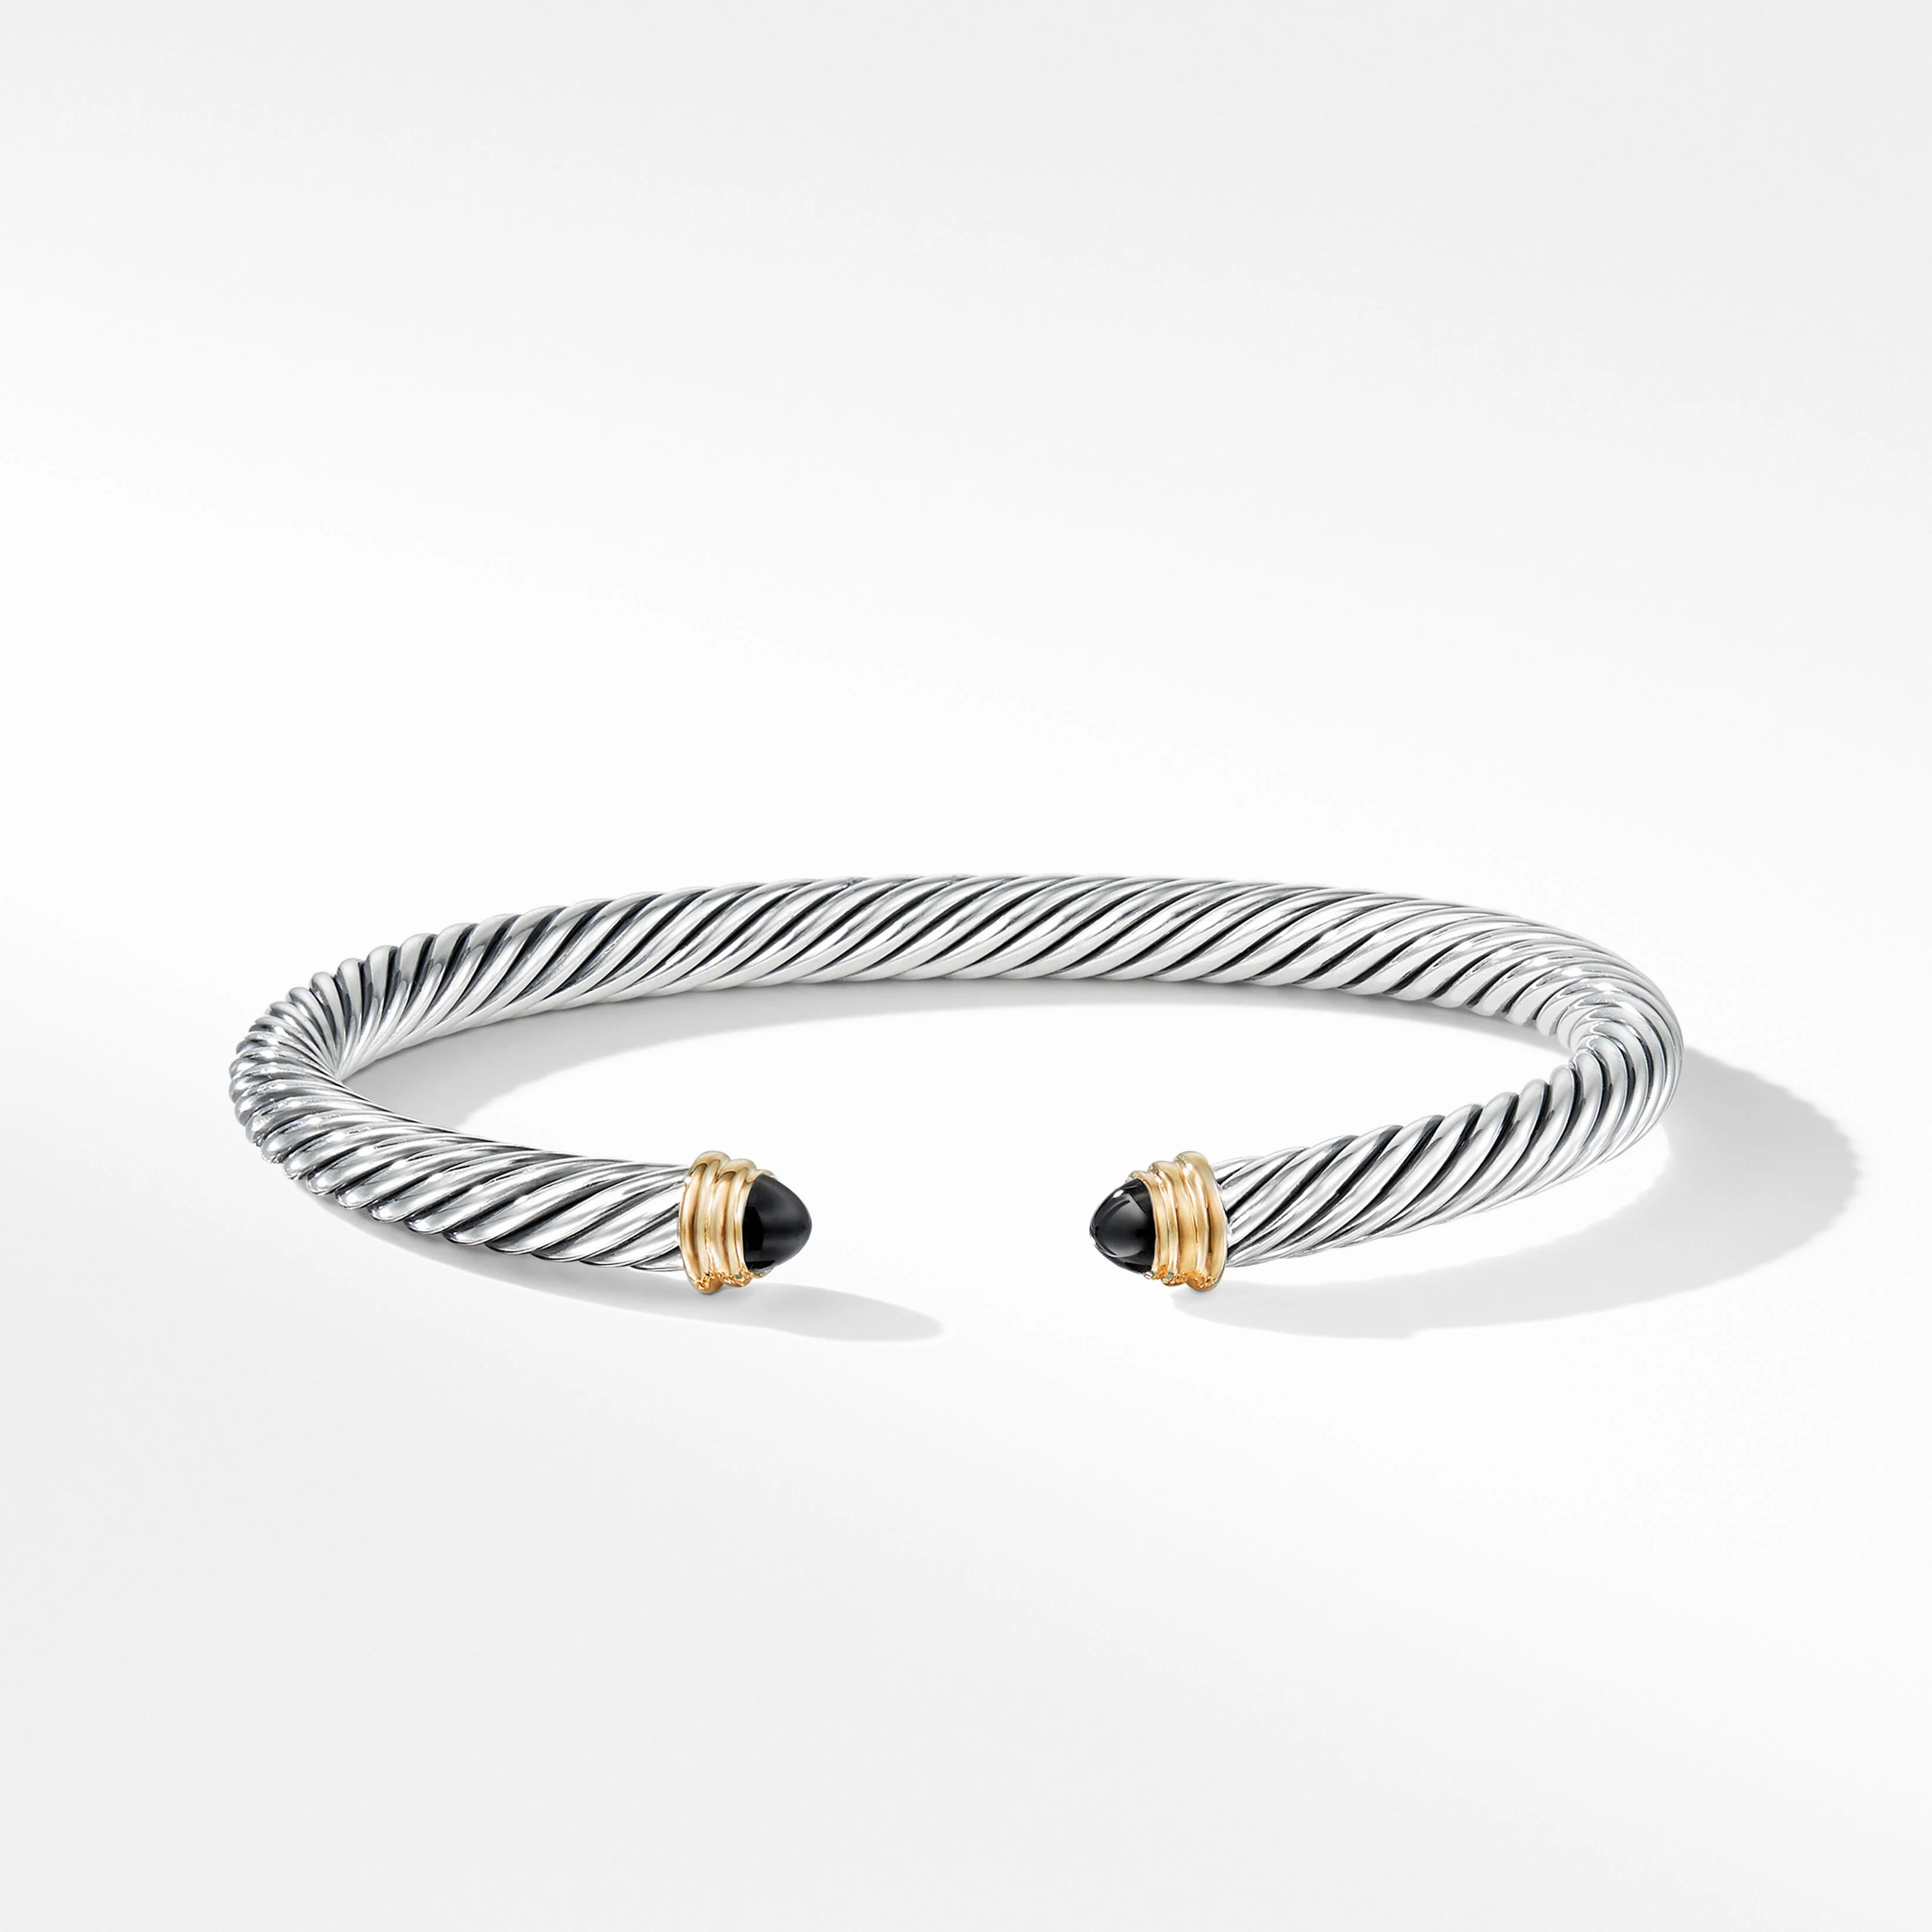 Cable Classics Bracelet in Sterling Silver with Black Onyx and 14K Yellow Gold | David Yurman